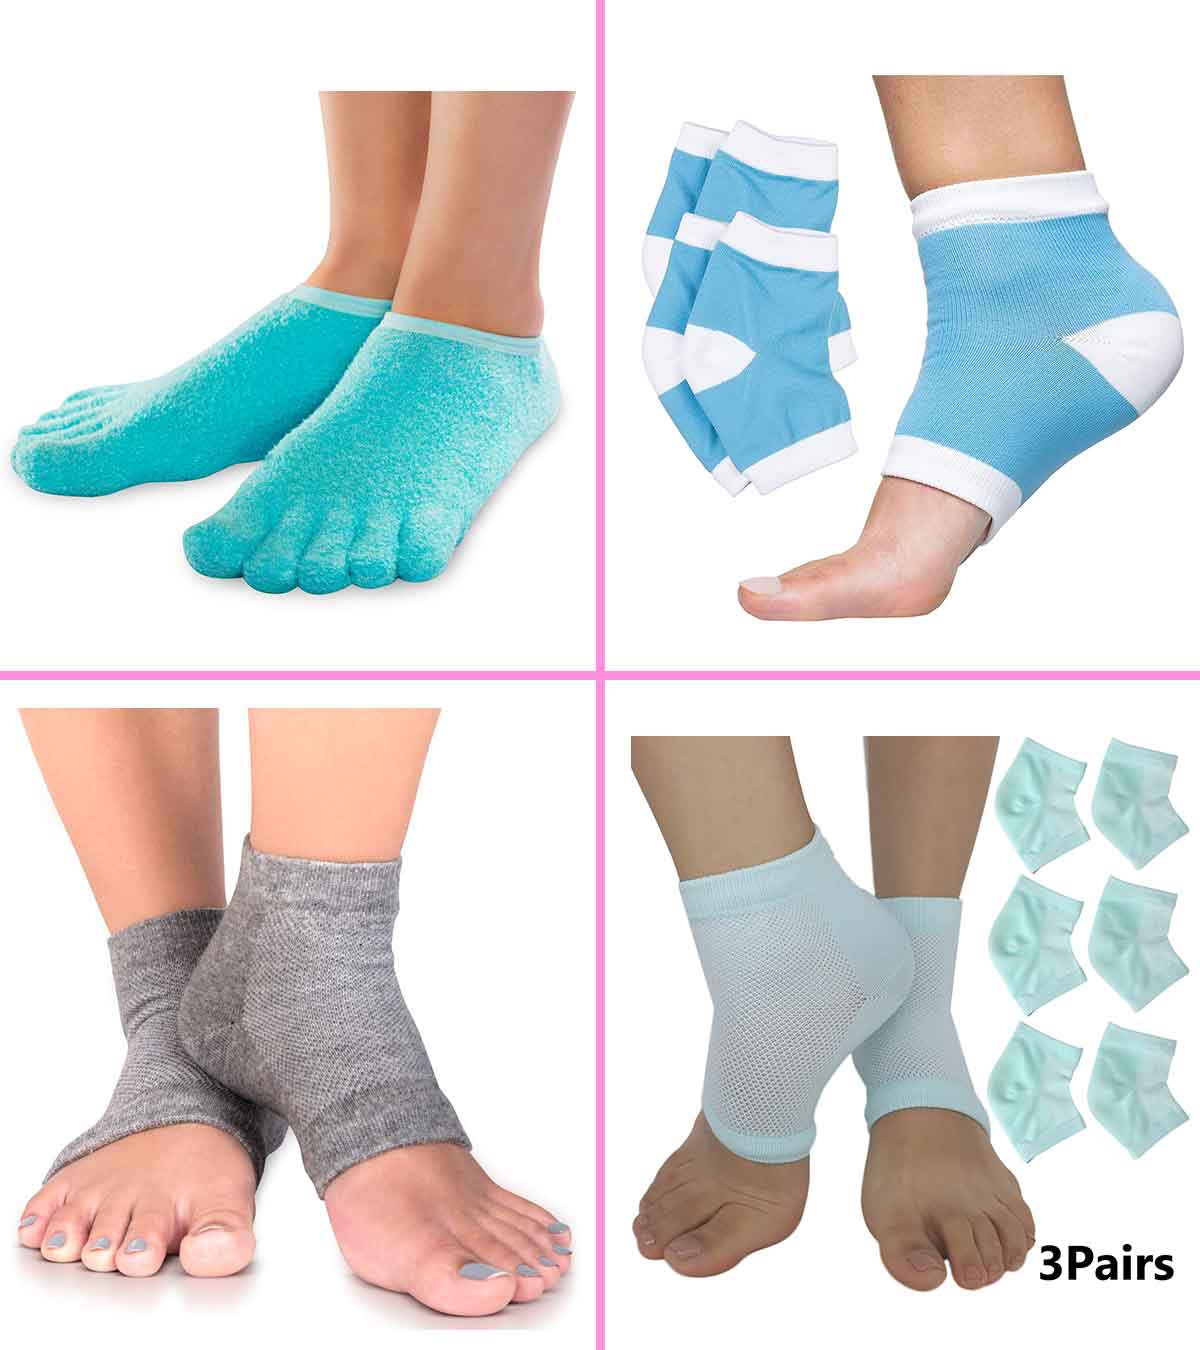 15 Best Moisturizing Socks To Buy In 2023 And A Buyer's Guide